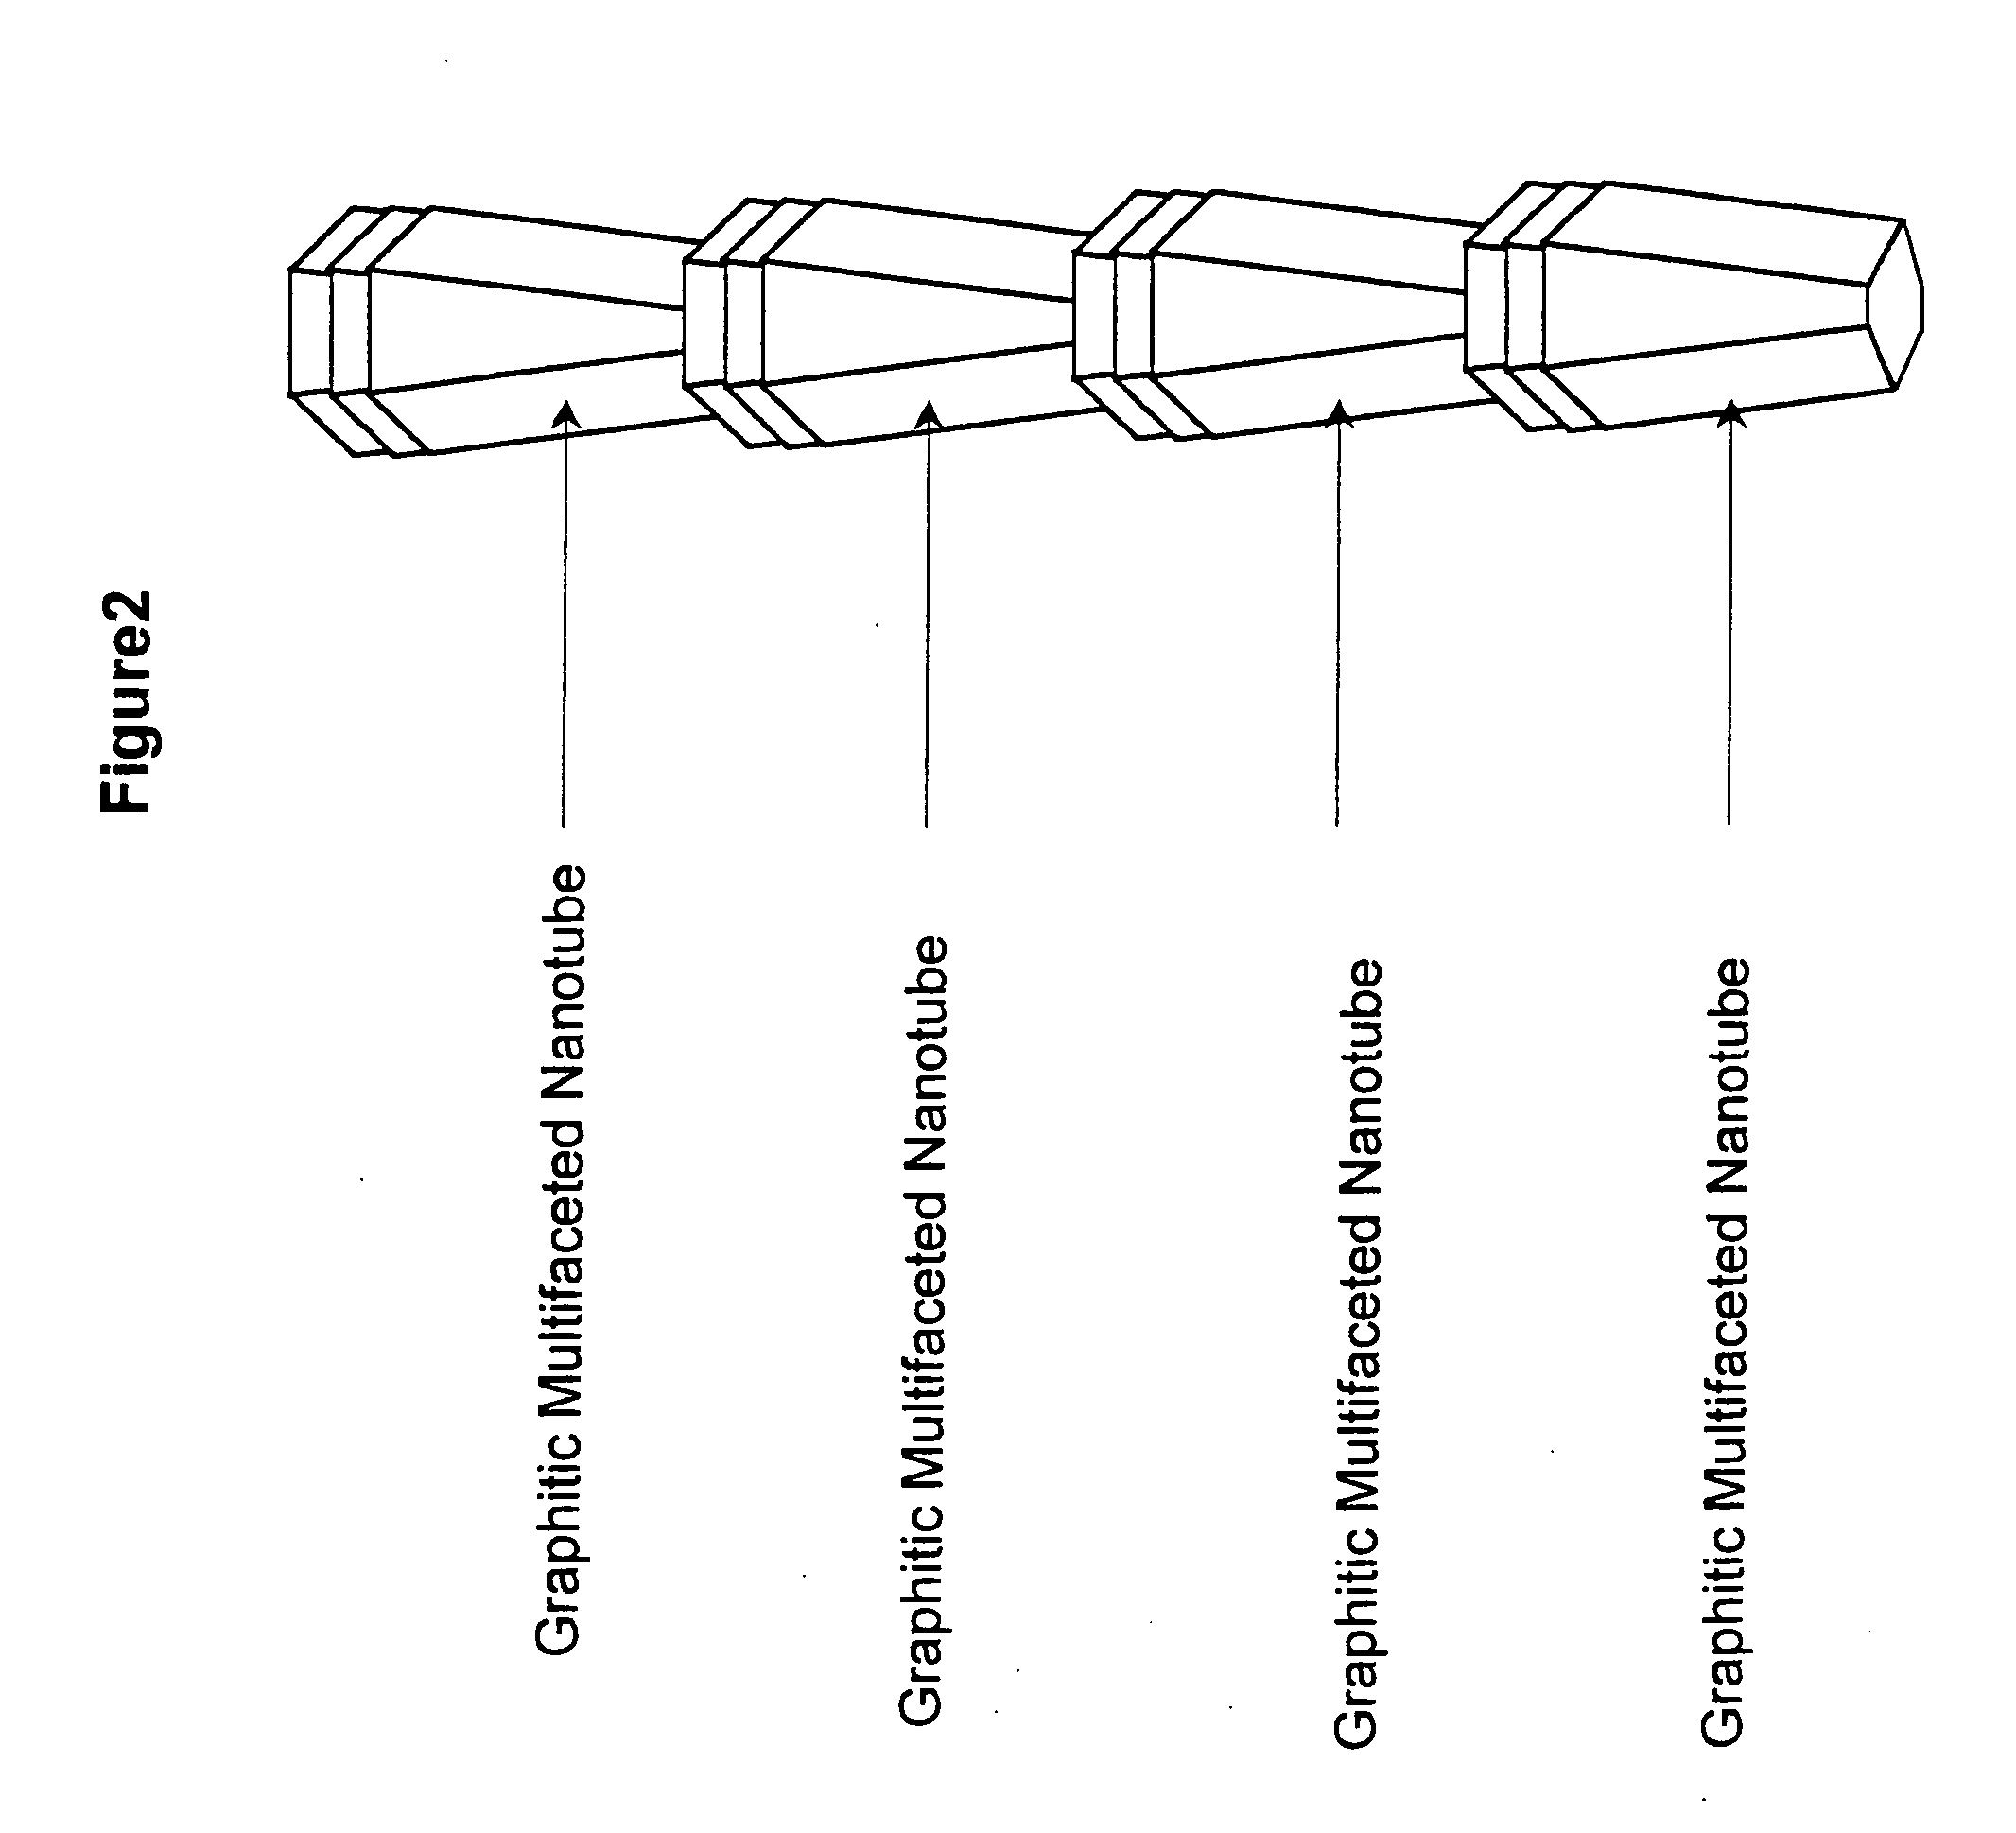 Conductive polymeric structures containing graphite nanofibers having graphite sheets parallel to the growth axis